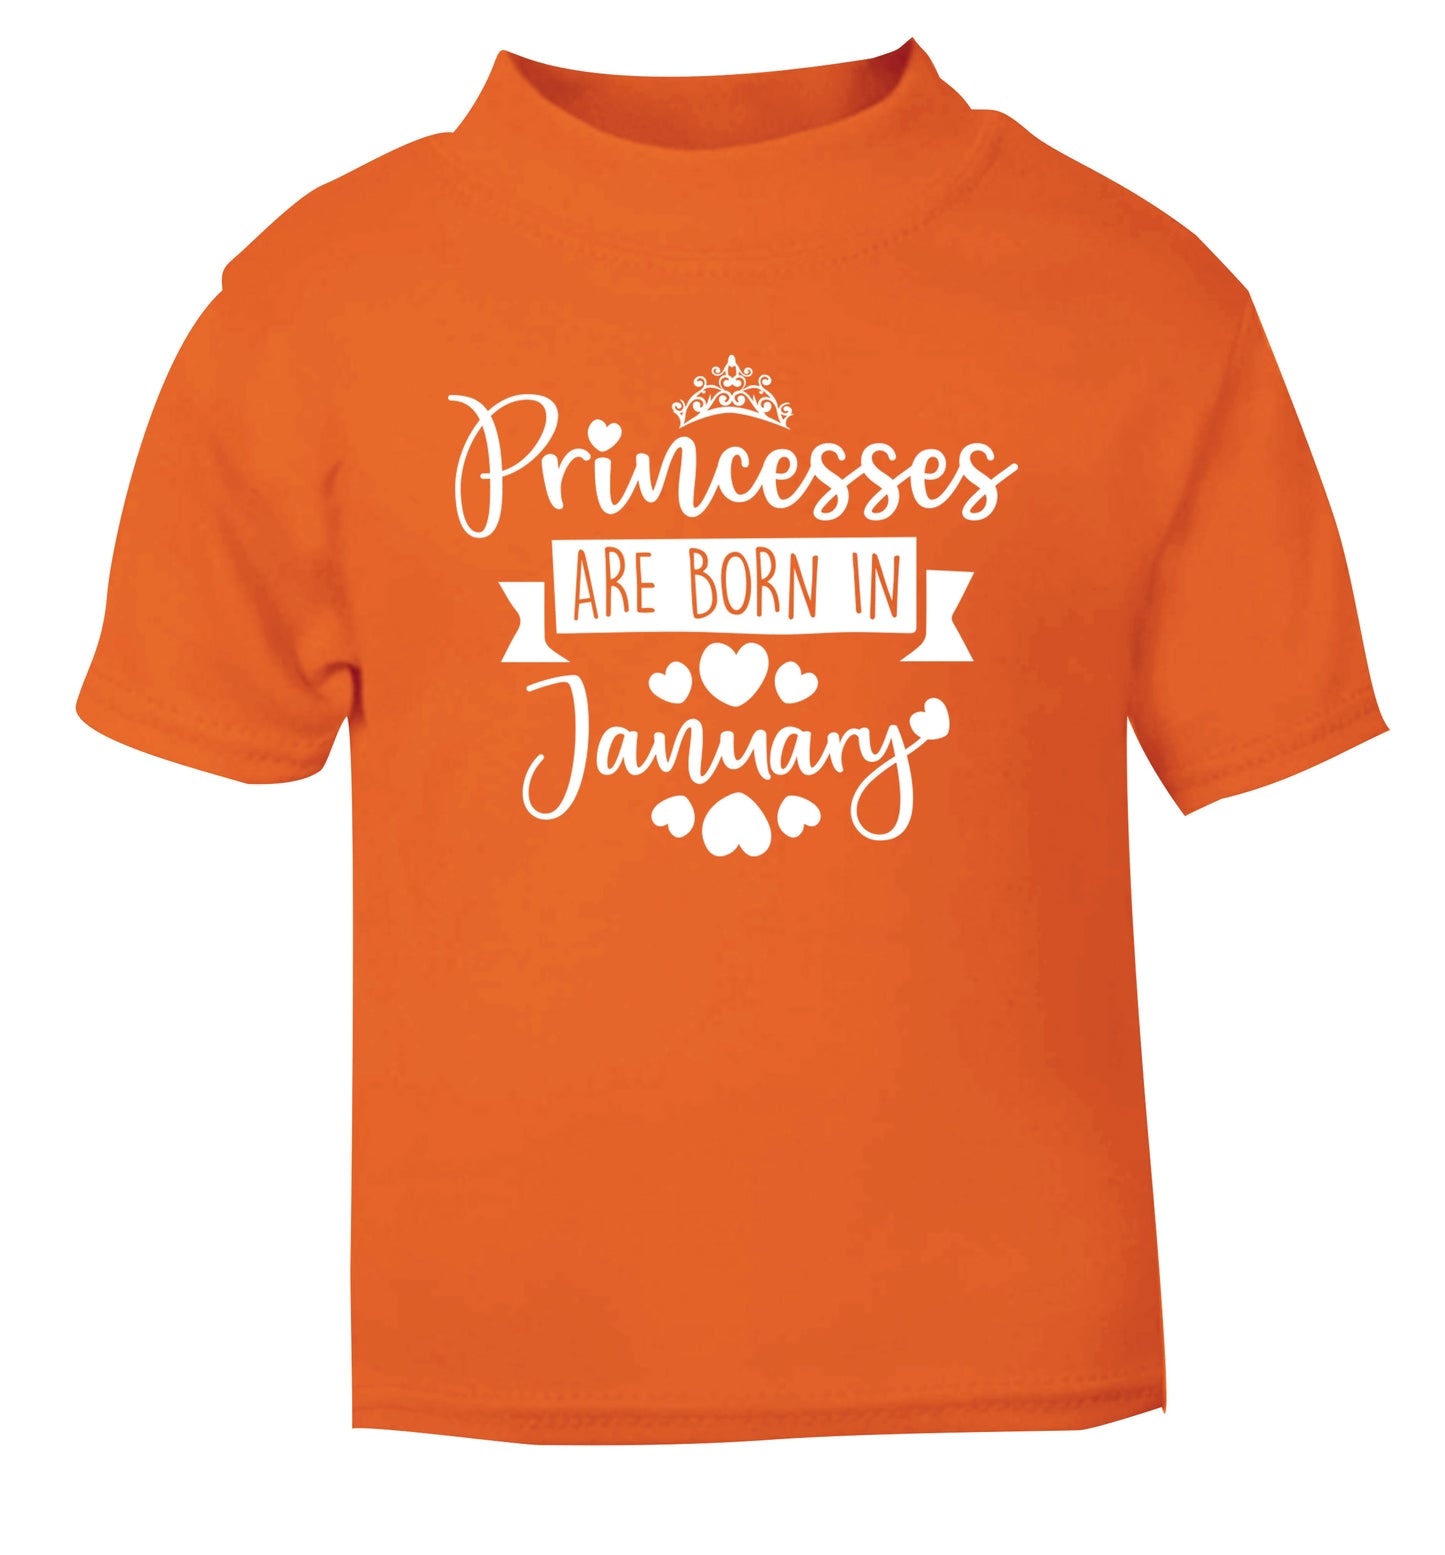 Princesses are born in January orange Baby Toddler Tshirt 2 Years